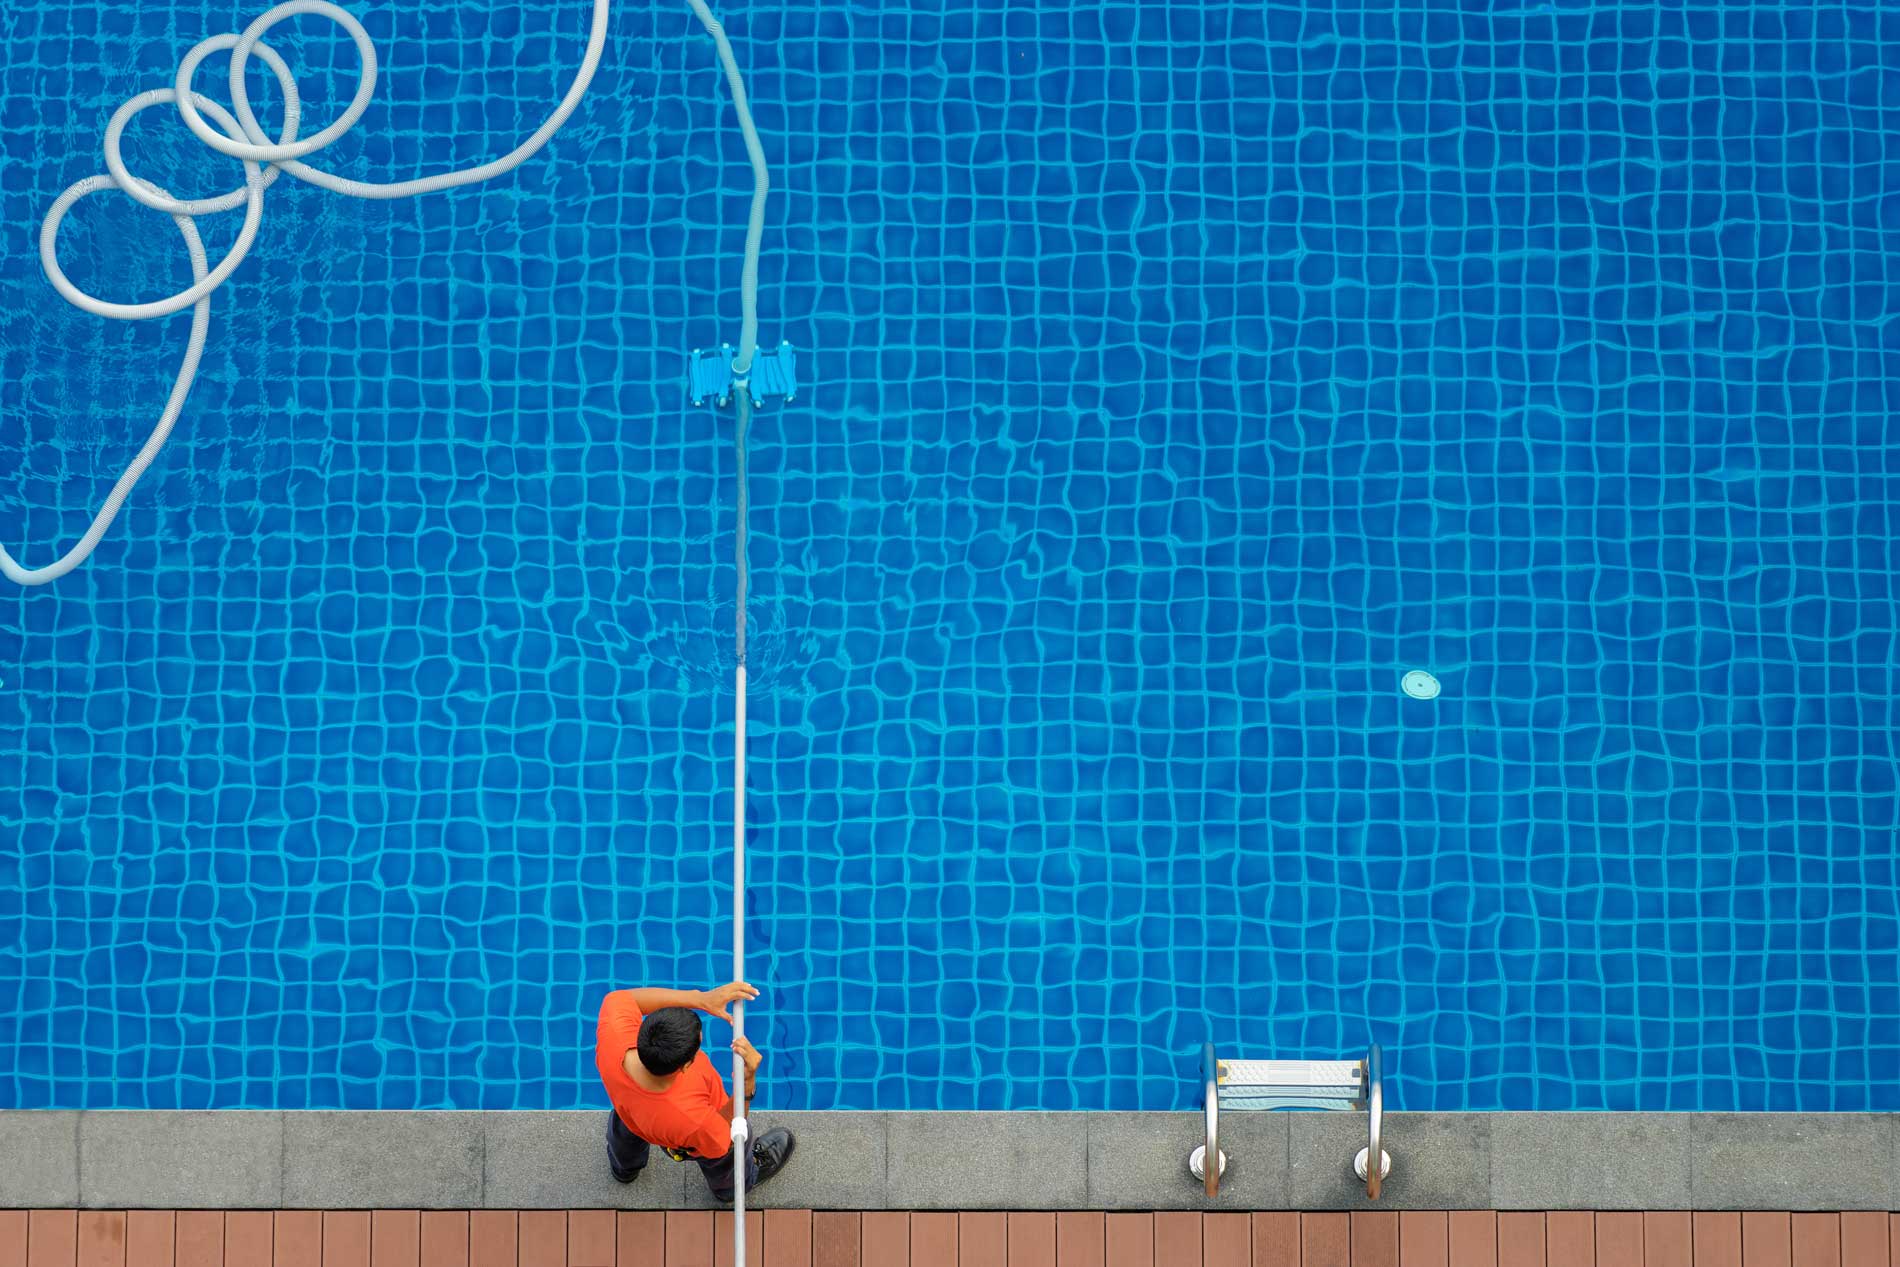 A pool repair worker is cleaning a blue pool